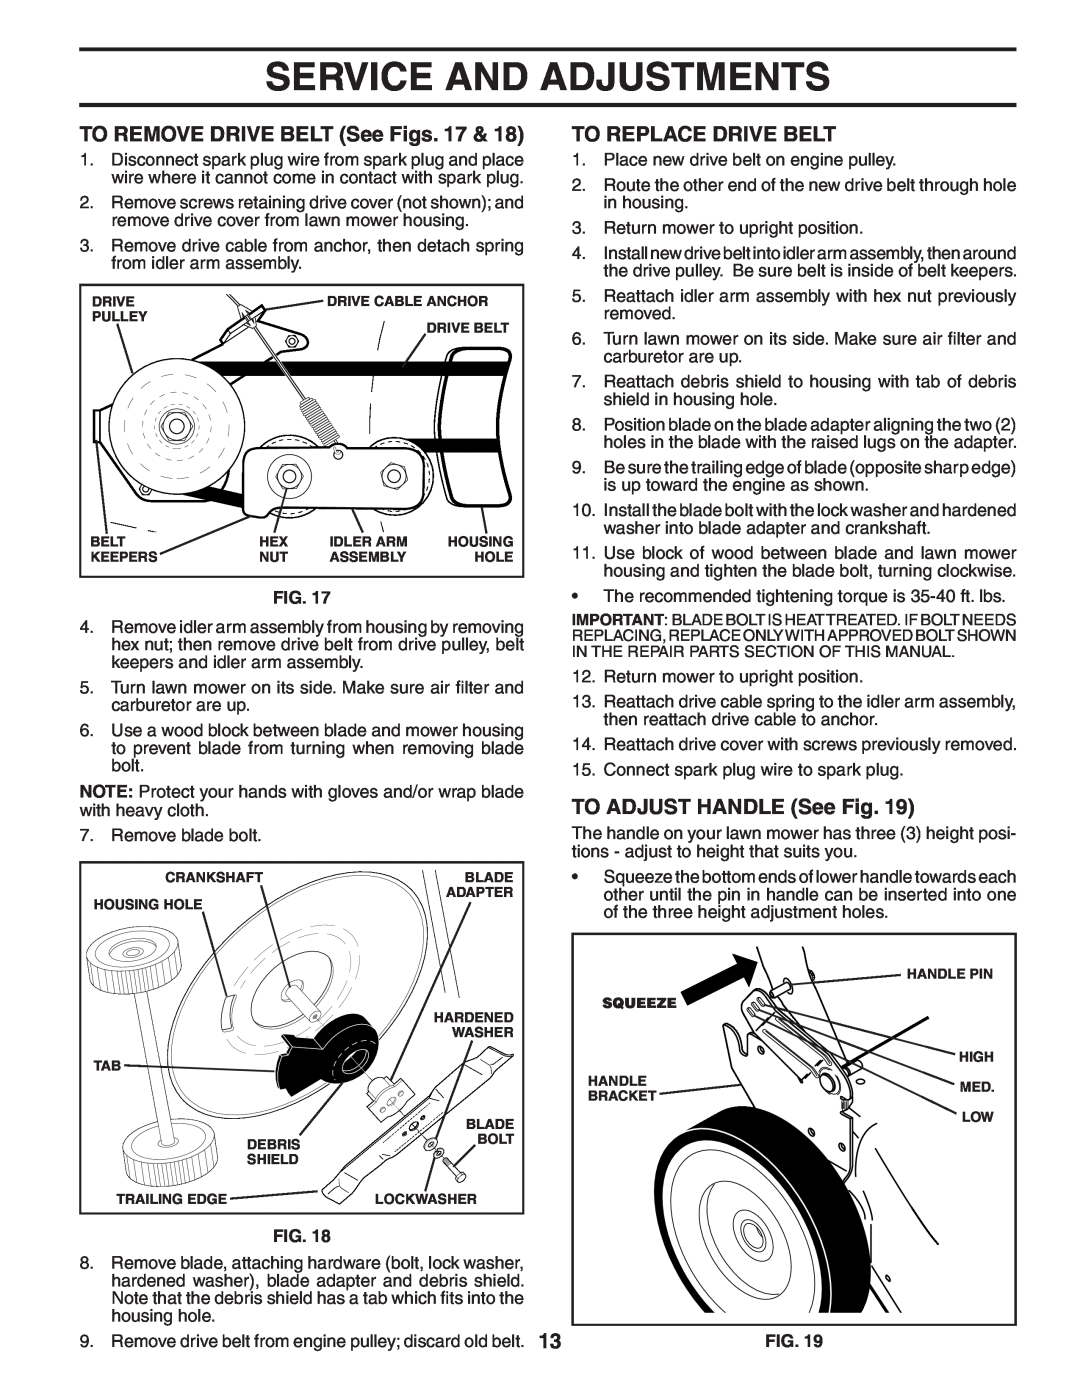 Husqvarna 5521RS owner manual TO REMOVE DRIVE BELT See Figs. 17, To Replace Drive Belt, TO ADJUST HANDLE See Fig 